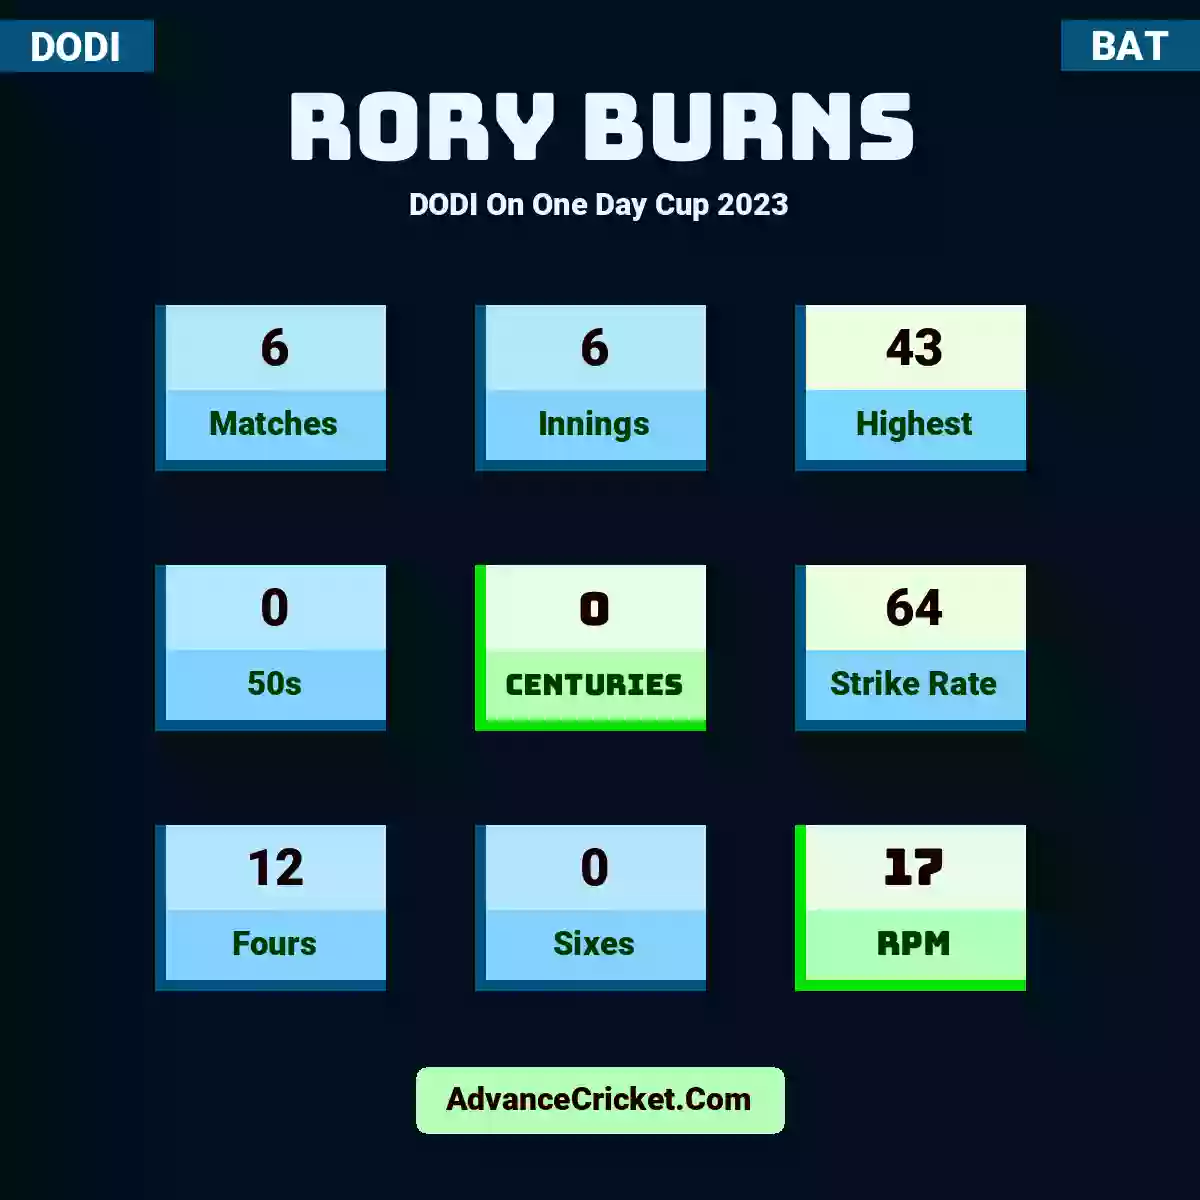 Rory Burns DODI  On One Day Cup 2023, Rory Burns played 6 matches, scored 43 runs as highest, 0 half-centuries, and 0 centuries, with a strike rate of 64. R.Burns hit 12 fours and 0 sixes, with an RPM of 17.